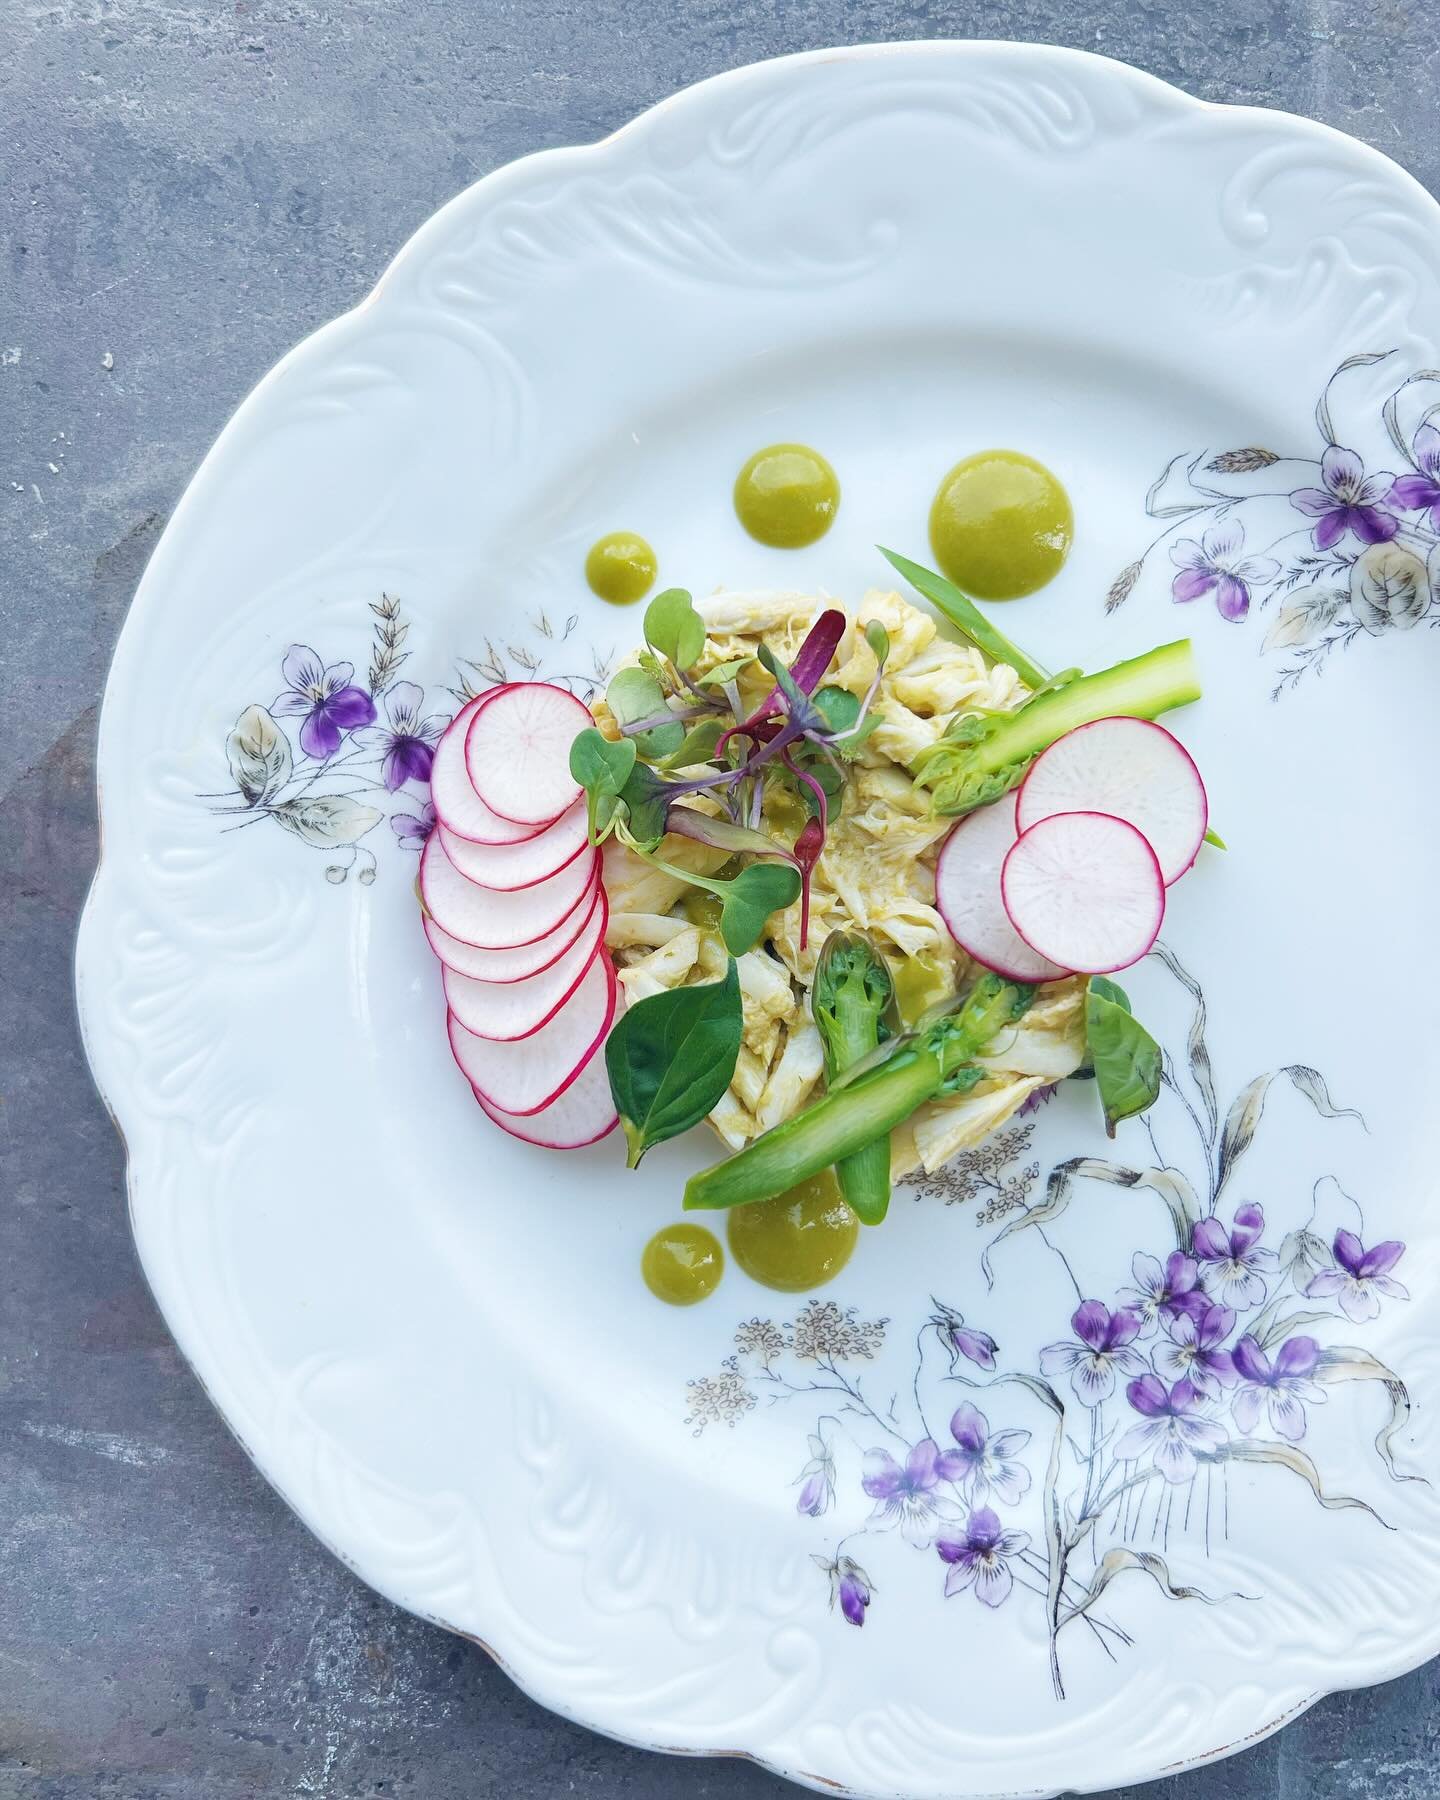 it&rsquo;s FriYAYYYYY ✨

hitting the menu, 

Chesapeake crab salad 
shaved radish &amp; asparagus 
smoked onion jam 
torn thai basil 
lacto-fermented asparagus vinaigrette 

🦀🤍🦀🤍🦀🤍

just a reminder&hellip; our book opens 30 days out, simply mea